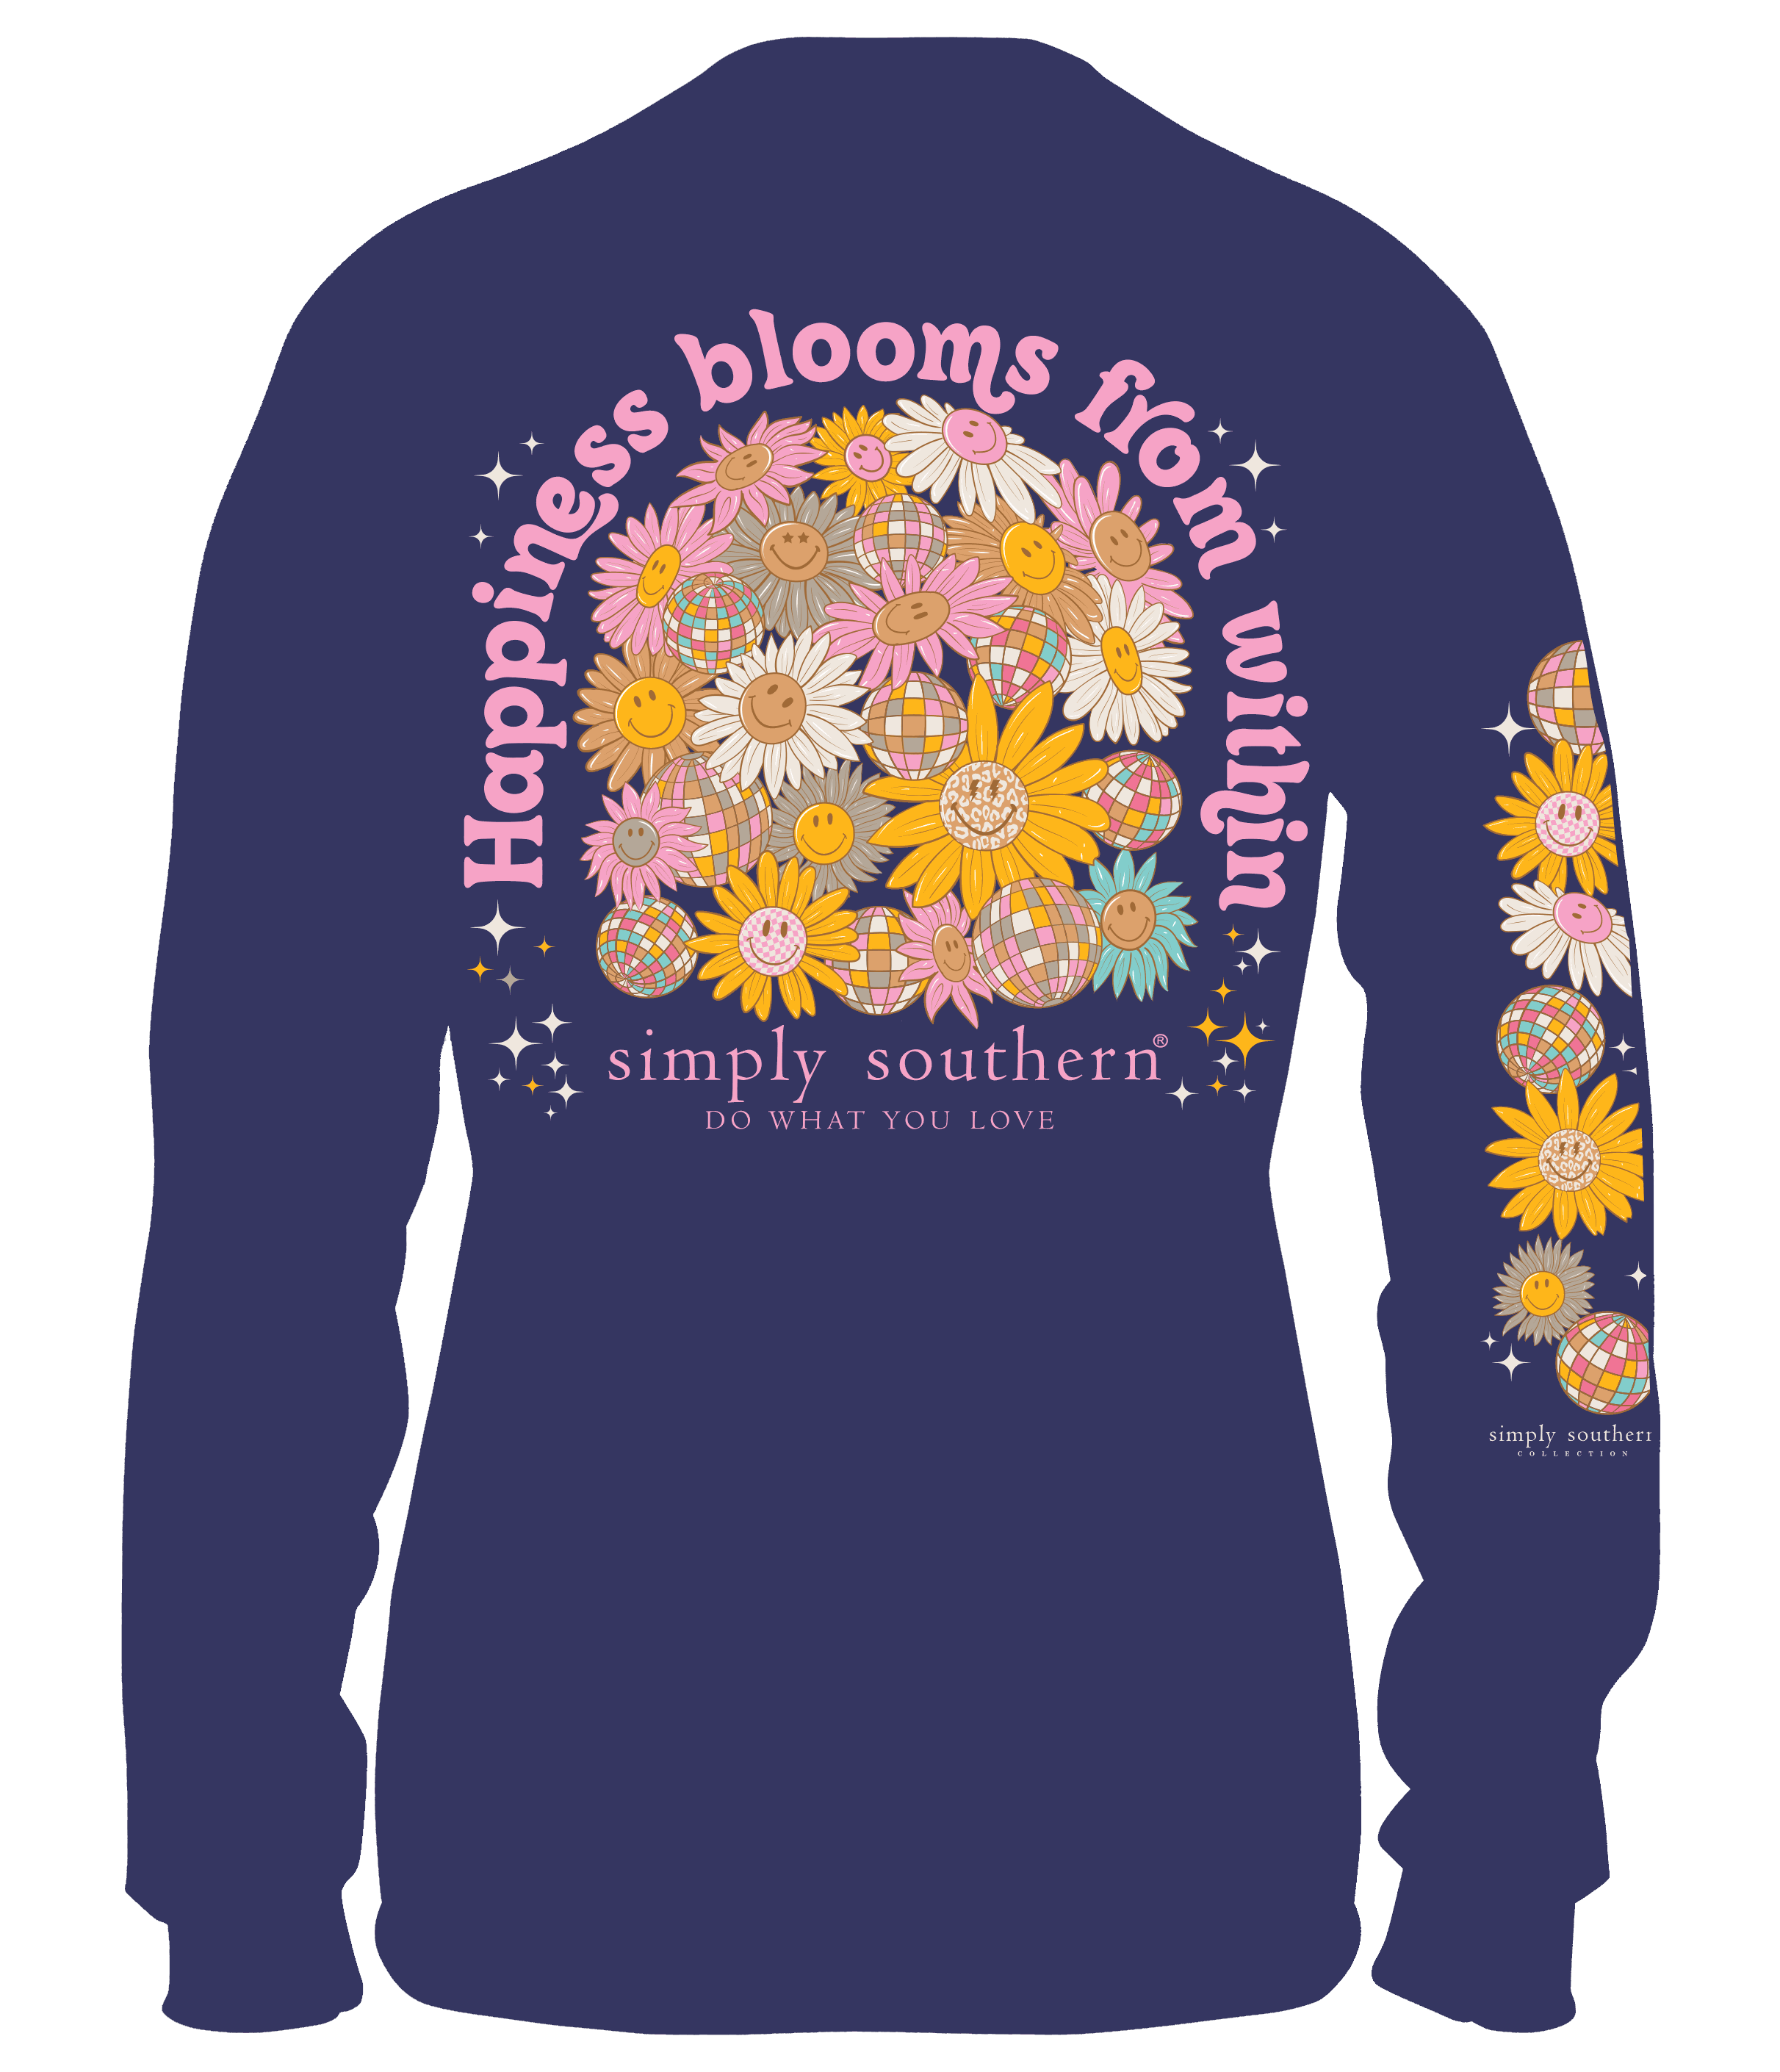 "Simply Southern 100% Cotton Long Sleeve T-Shirt - 'Happiness Blooms from Within' with Floral Design